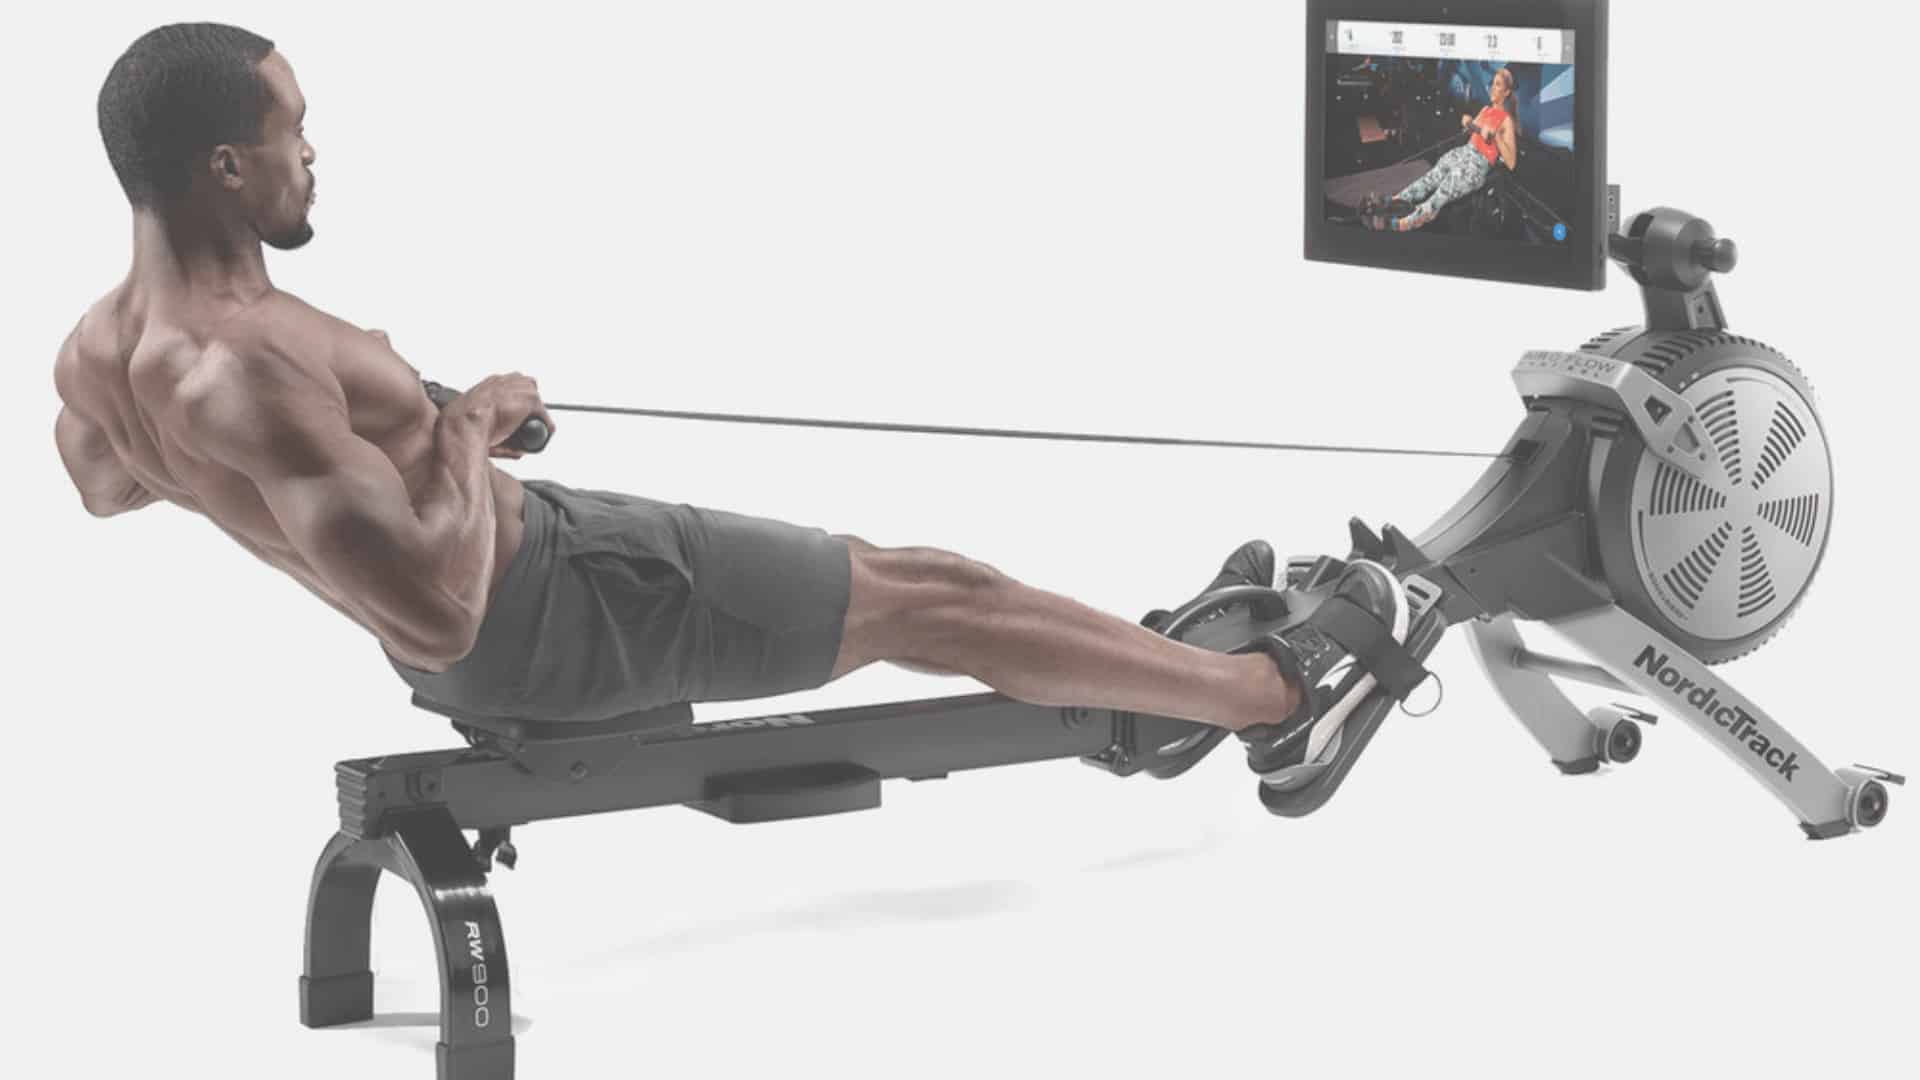 NordicTrack Rower Home Gym